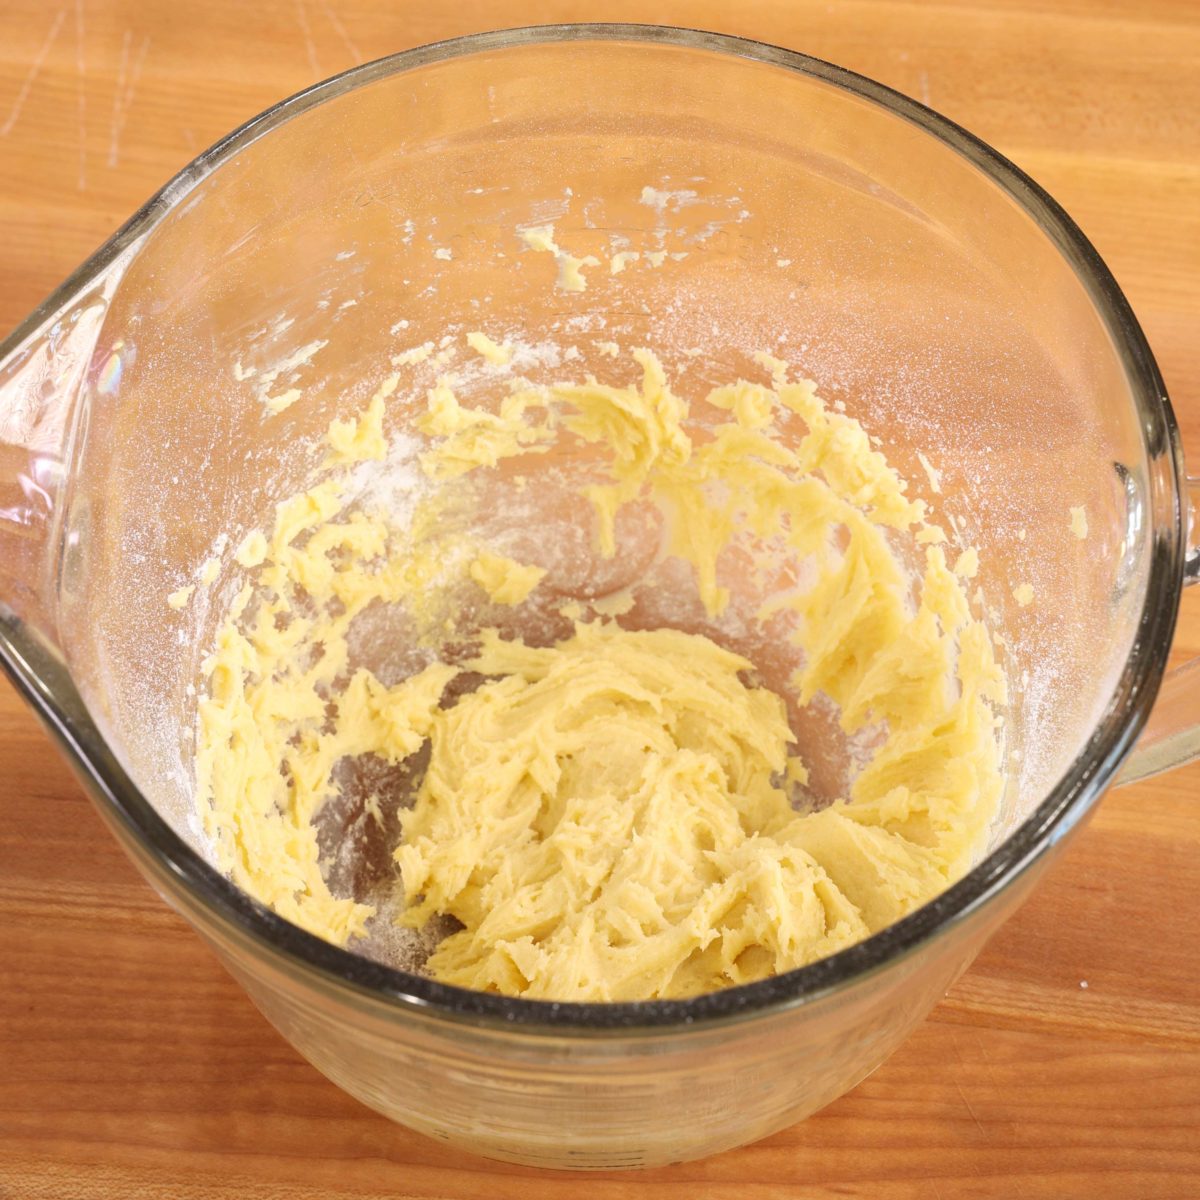 flour, baking powder, egg, butter and sugar in a mixing bowl.